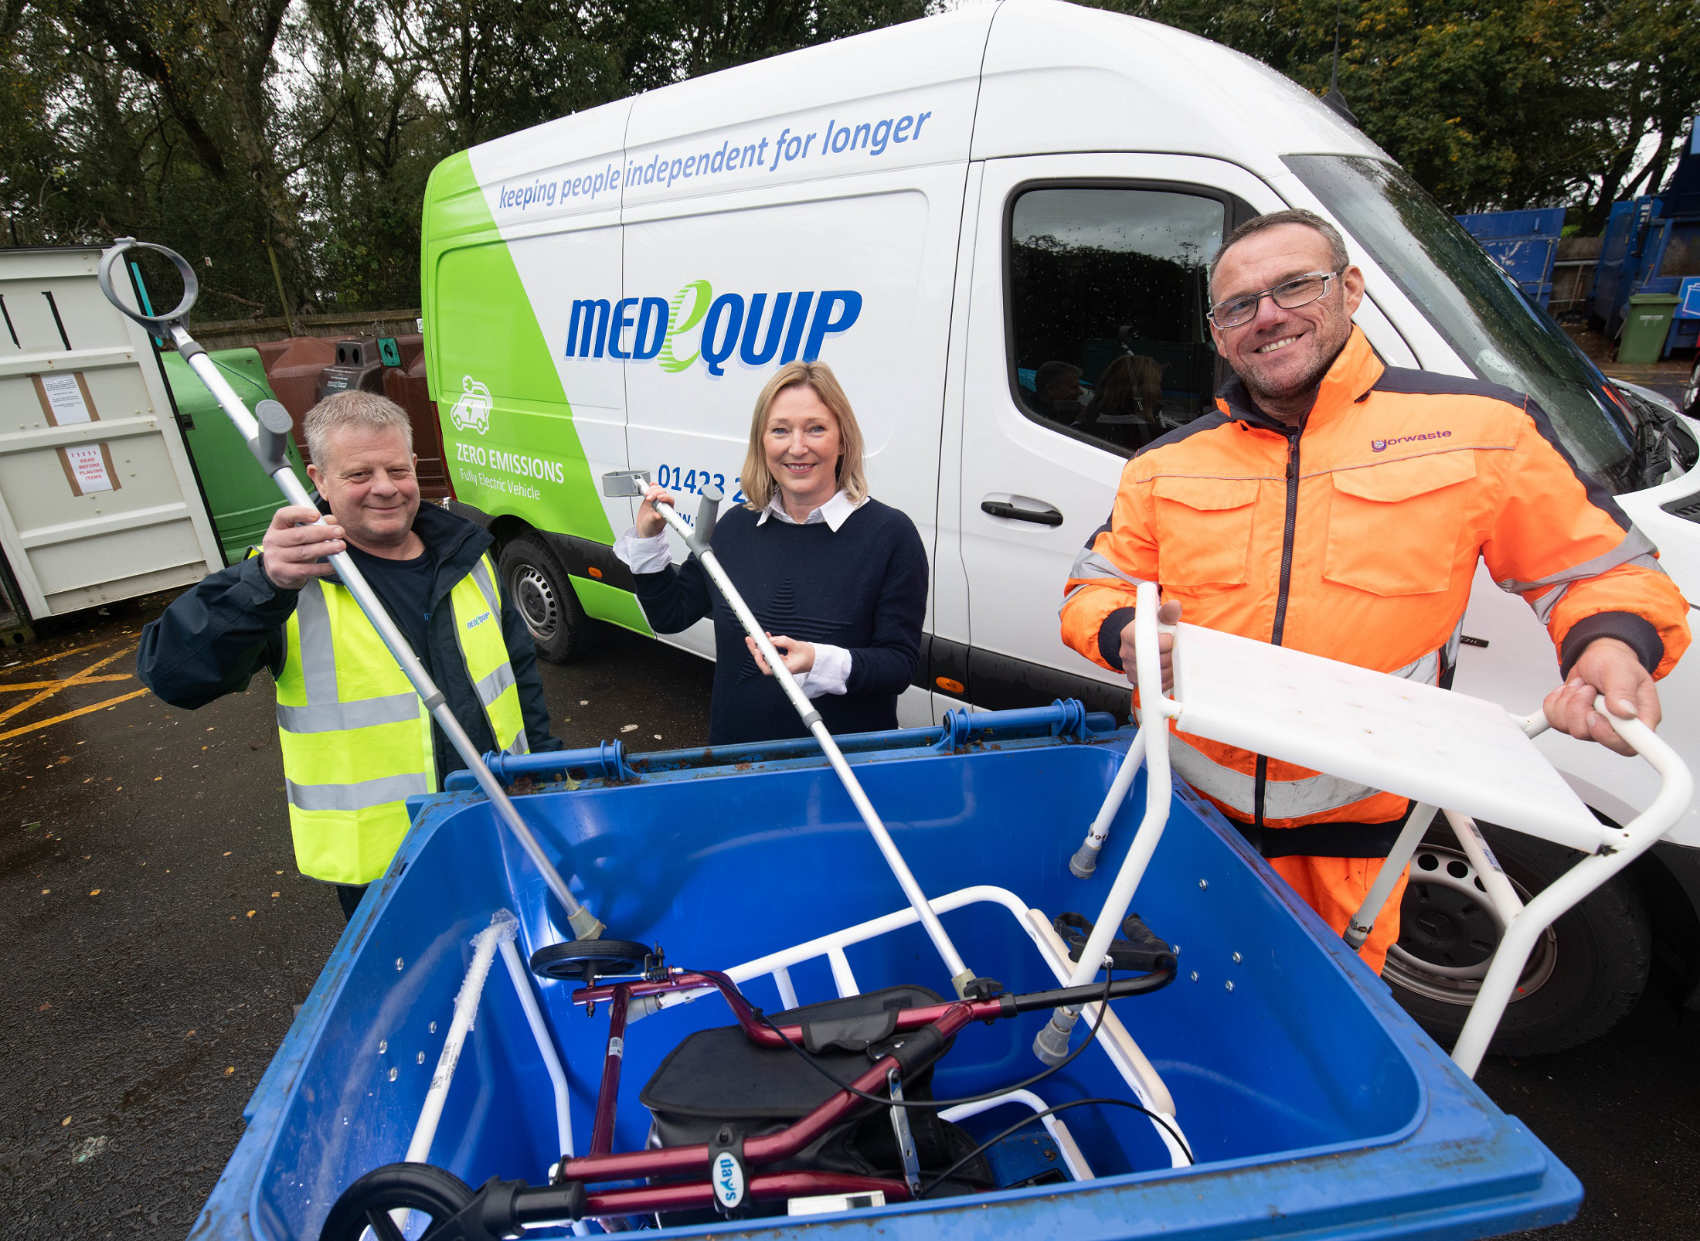 Daren Richardson from Medequip, Jenny Lowes, service improvement manager at North Yorkshire Council, and Steve Midgley from Yorwaste, recycling unwanted medical equipment at Northallerton HWRC